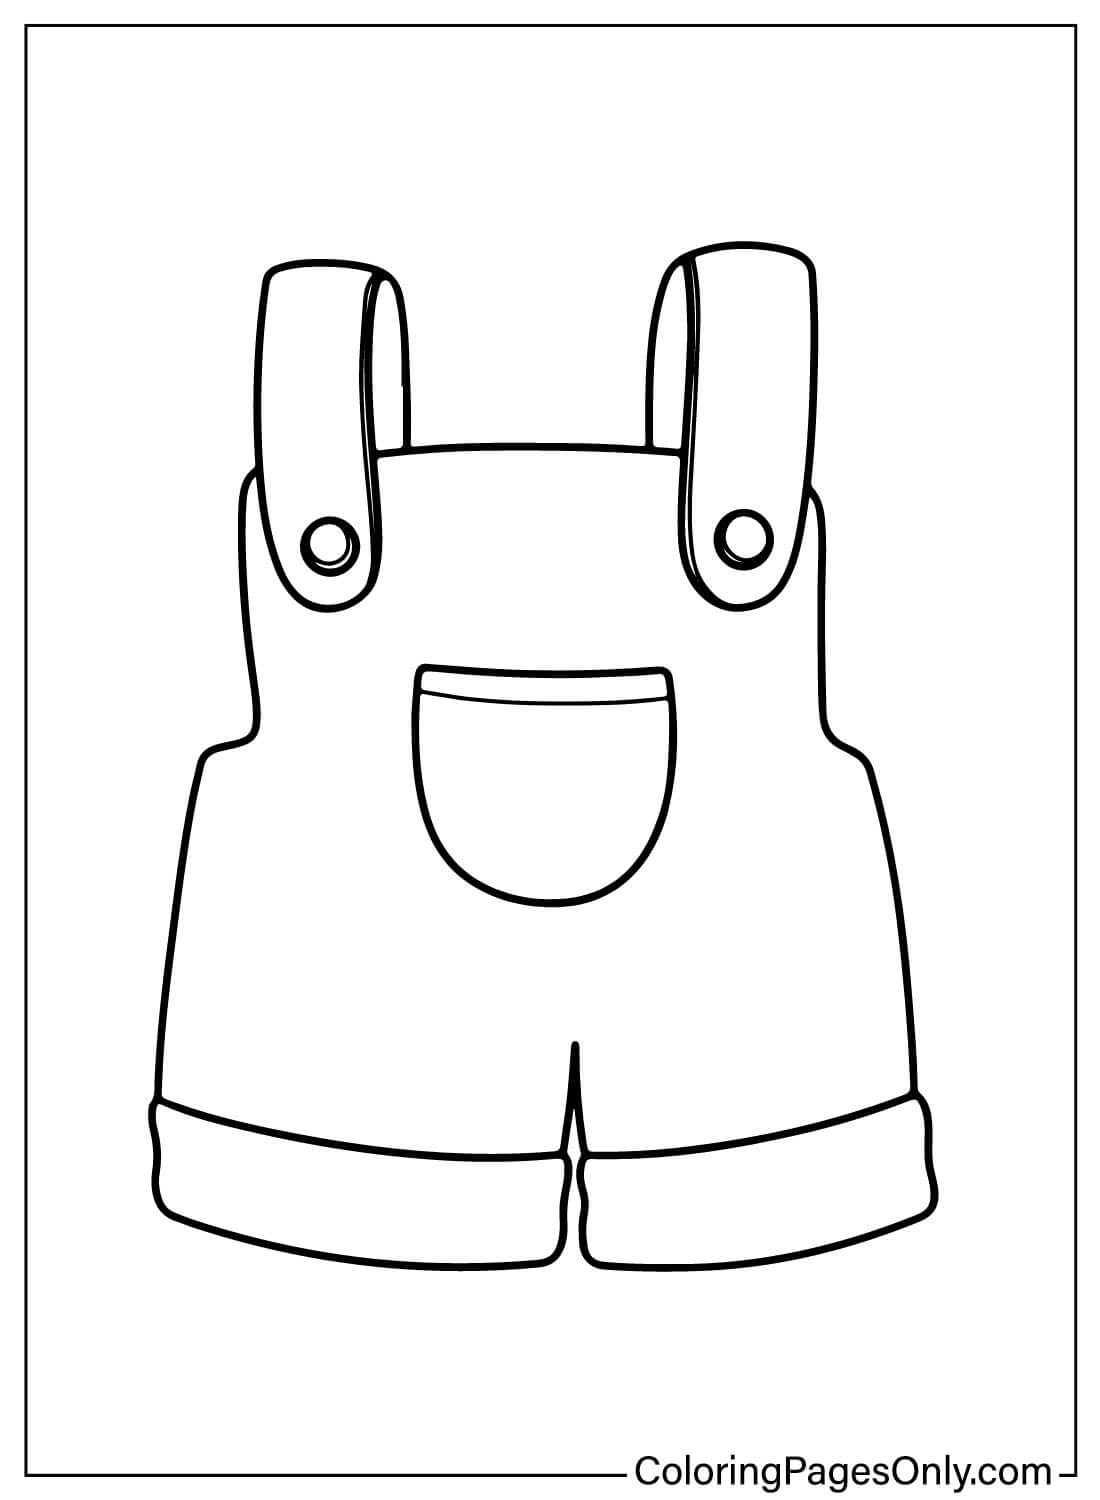 Coloring Page Free Baby Clothes - Free Printable Coloring Pages